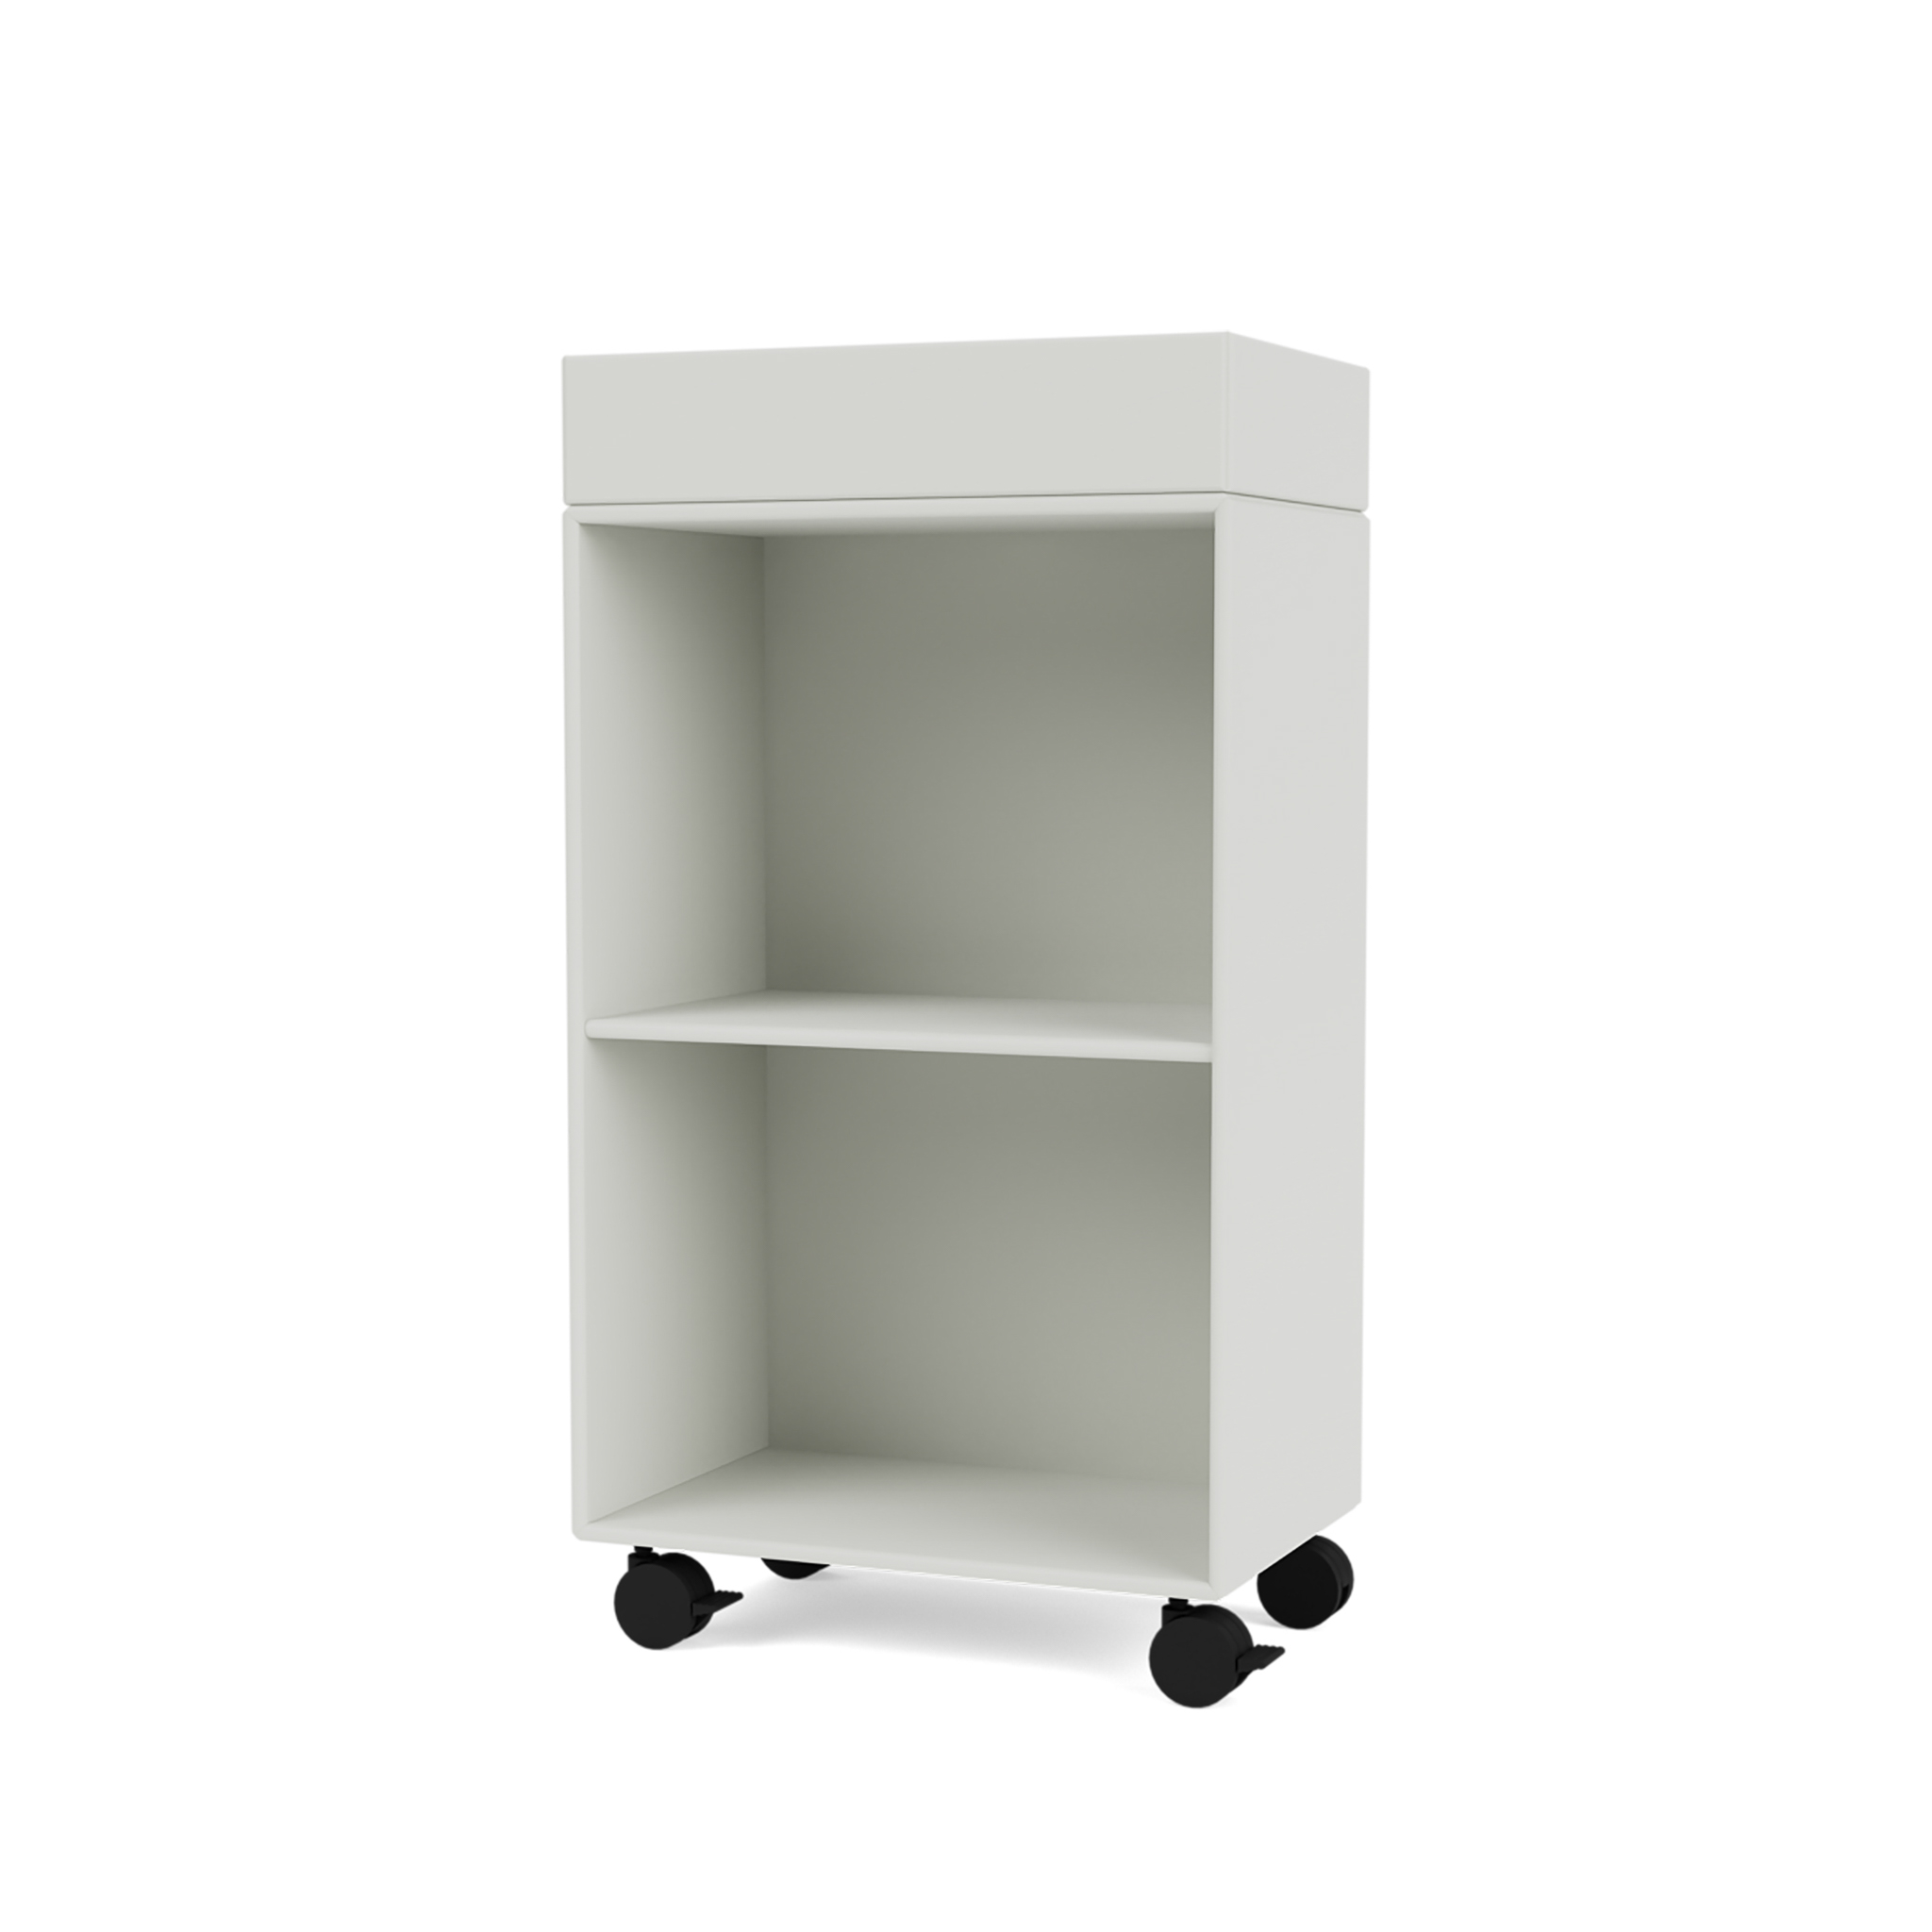 MONTANA // PREPPY - PREPPY BATHROOM TROLLEY WITH WHEELS | 09 NORDIC | WITH ROLLERS